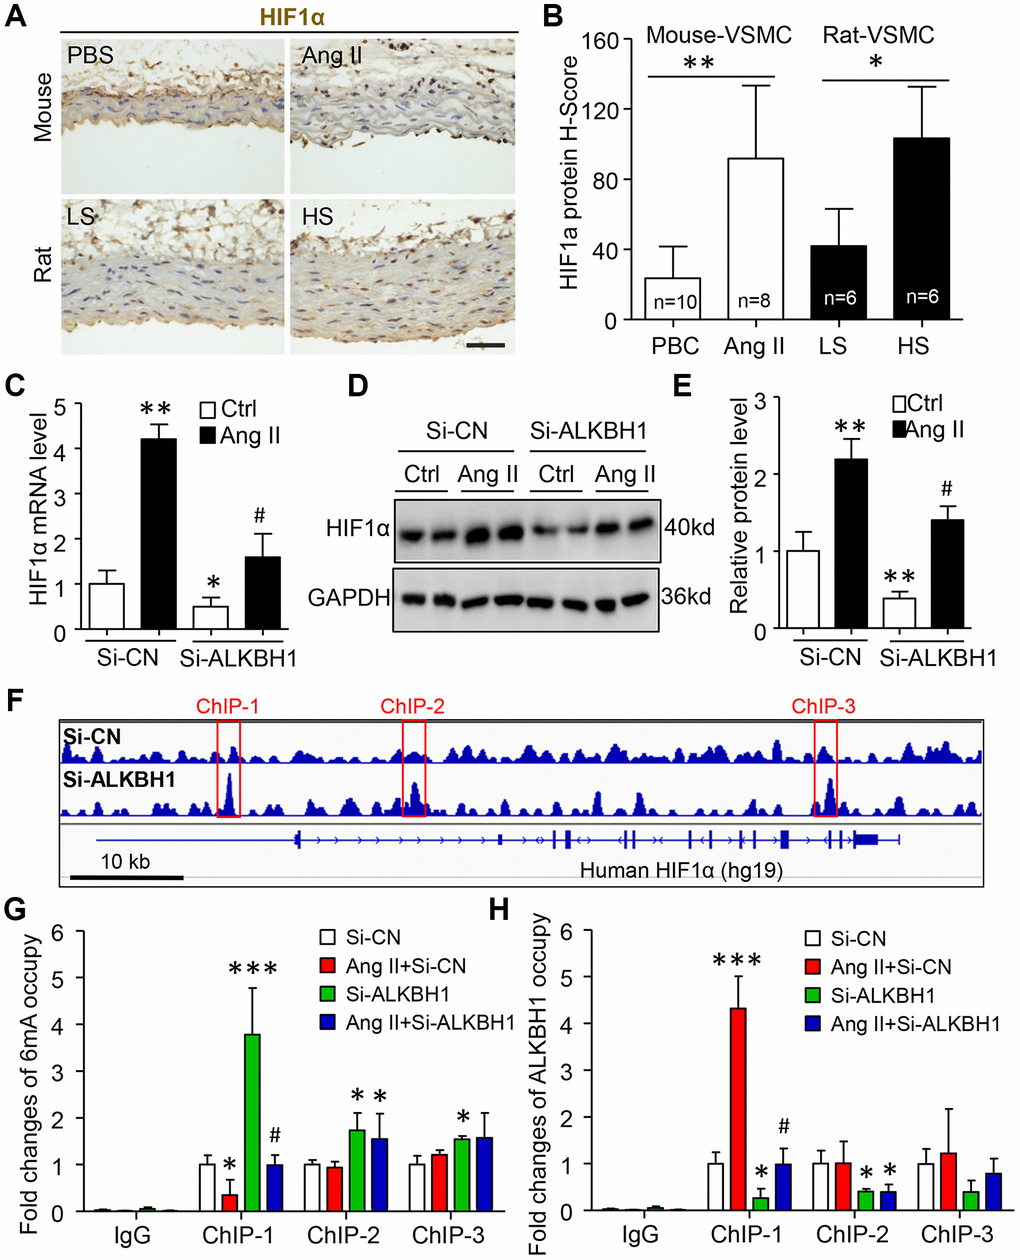 Ang II upregulates HIF1α by ALKBH1-mediated m6A modification. (A, B) Images and quantification of IHC staining for HIF1α in VSMCs of thoracic aortas from mice and rats with hypertension. Scale bar: 50 μm. Data as mean ± SD., *p C–E) HIF1α mRNA and protein analysis by RT-qPCR and western blot assay in HASMCs with Si-ALKBH1 and/or Ang II treatment. (F) Integrative genomics viewer plots showing increasing m6A peaks (red-labeled ChIP-1 to -3) in human HIF1α gene (hg19) region with ALKBH1 knockdown by siRNA from previous study (GEO: GSE118093). (G, H) Chromatin immunoprecipitation (ChIP) assay with m6A (G) or ALKBH1 (H) antibody used for immunoprecipitation on HIF1α gene fragments in treated HASMCs; normal IgG was an IP control. Data are mean ± SD (n= 4/group). *P#P